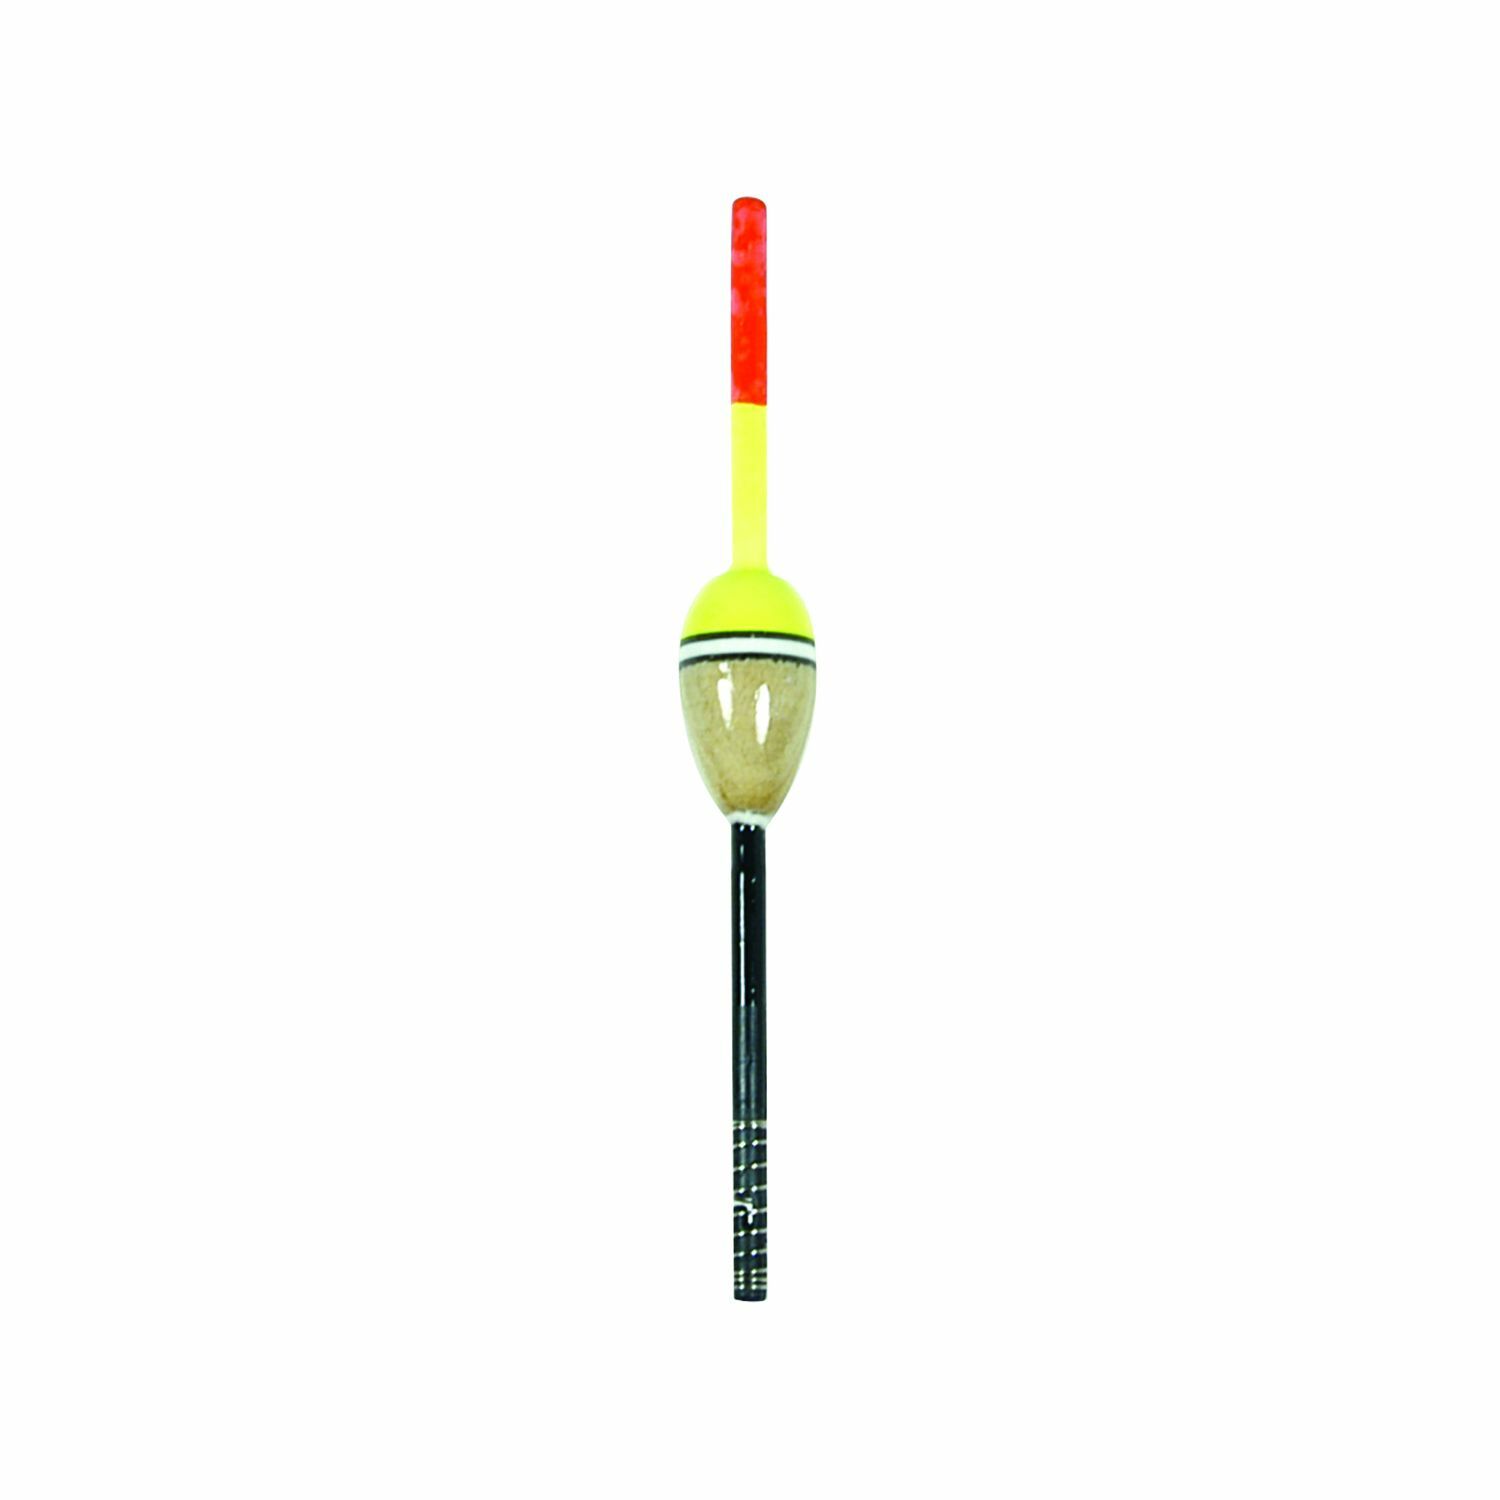 07080 Balsa Style Spring Fixed Stick Float - Oval